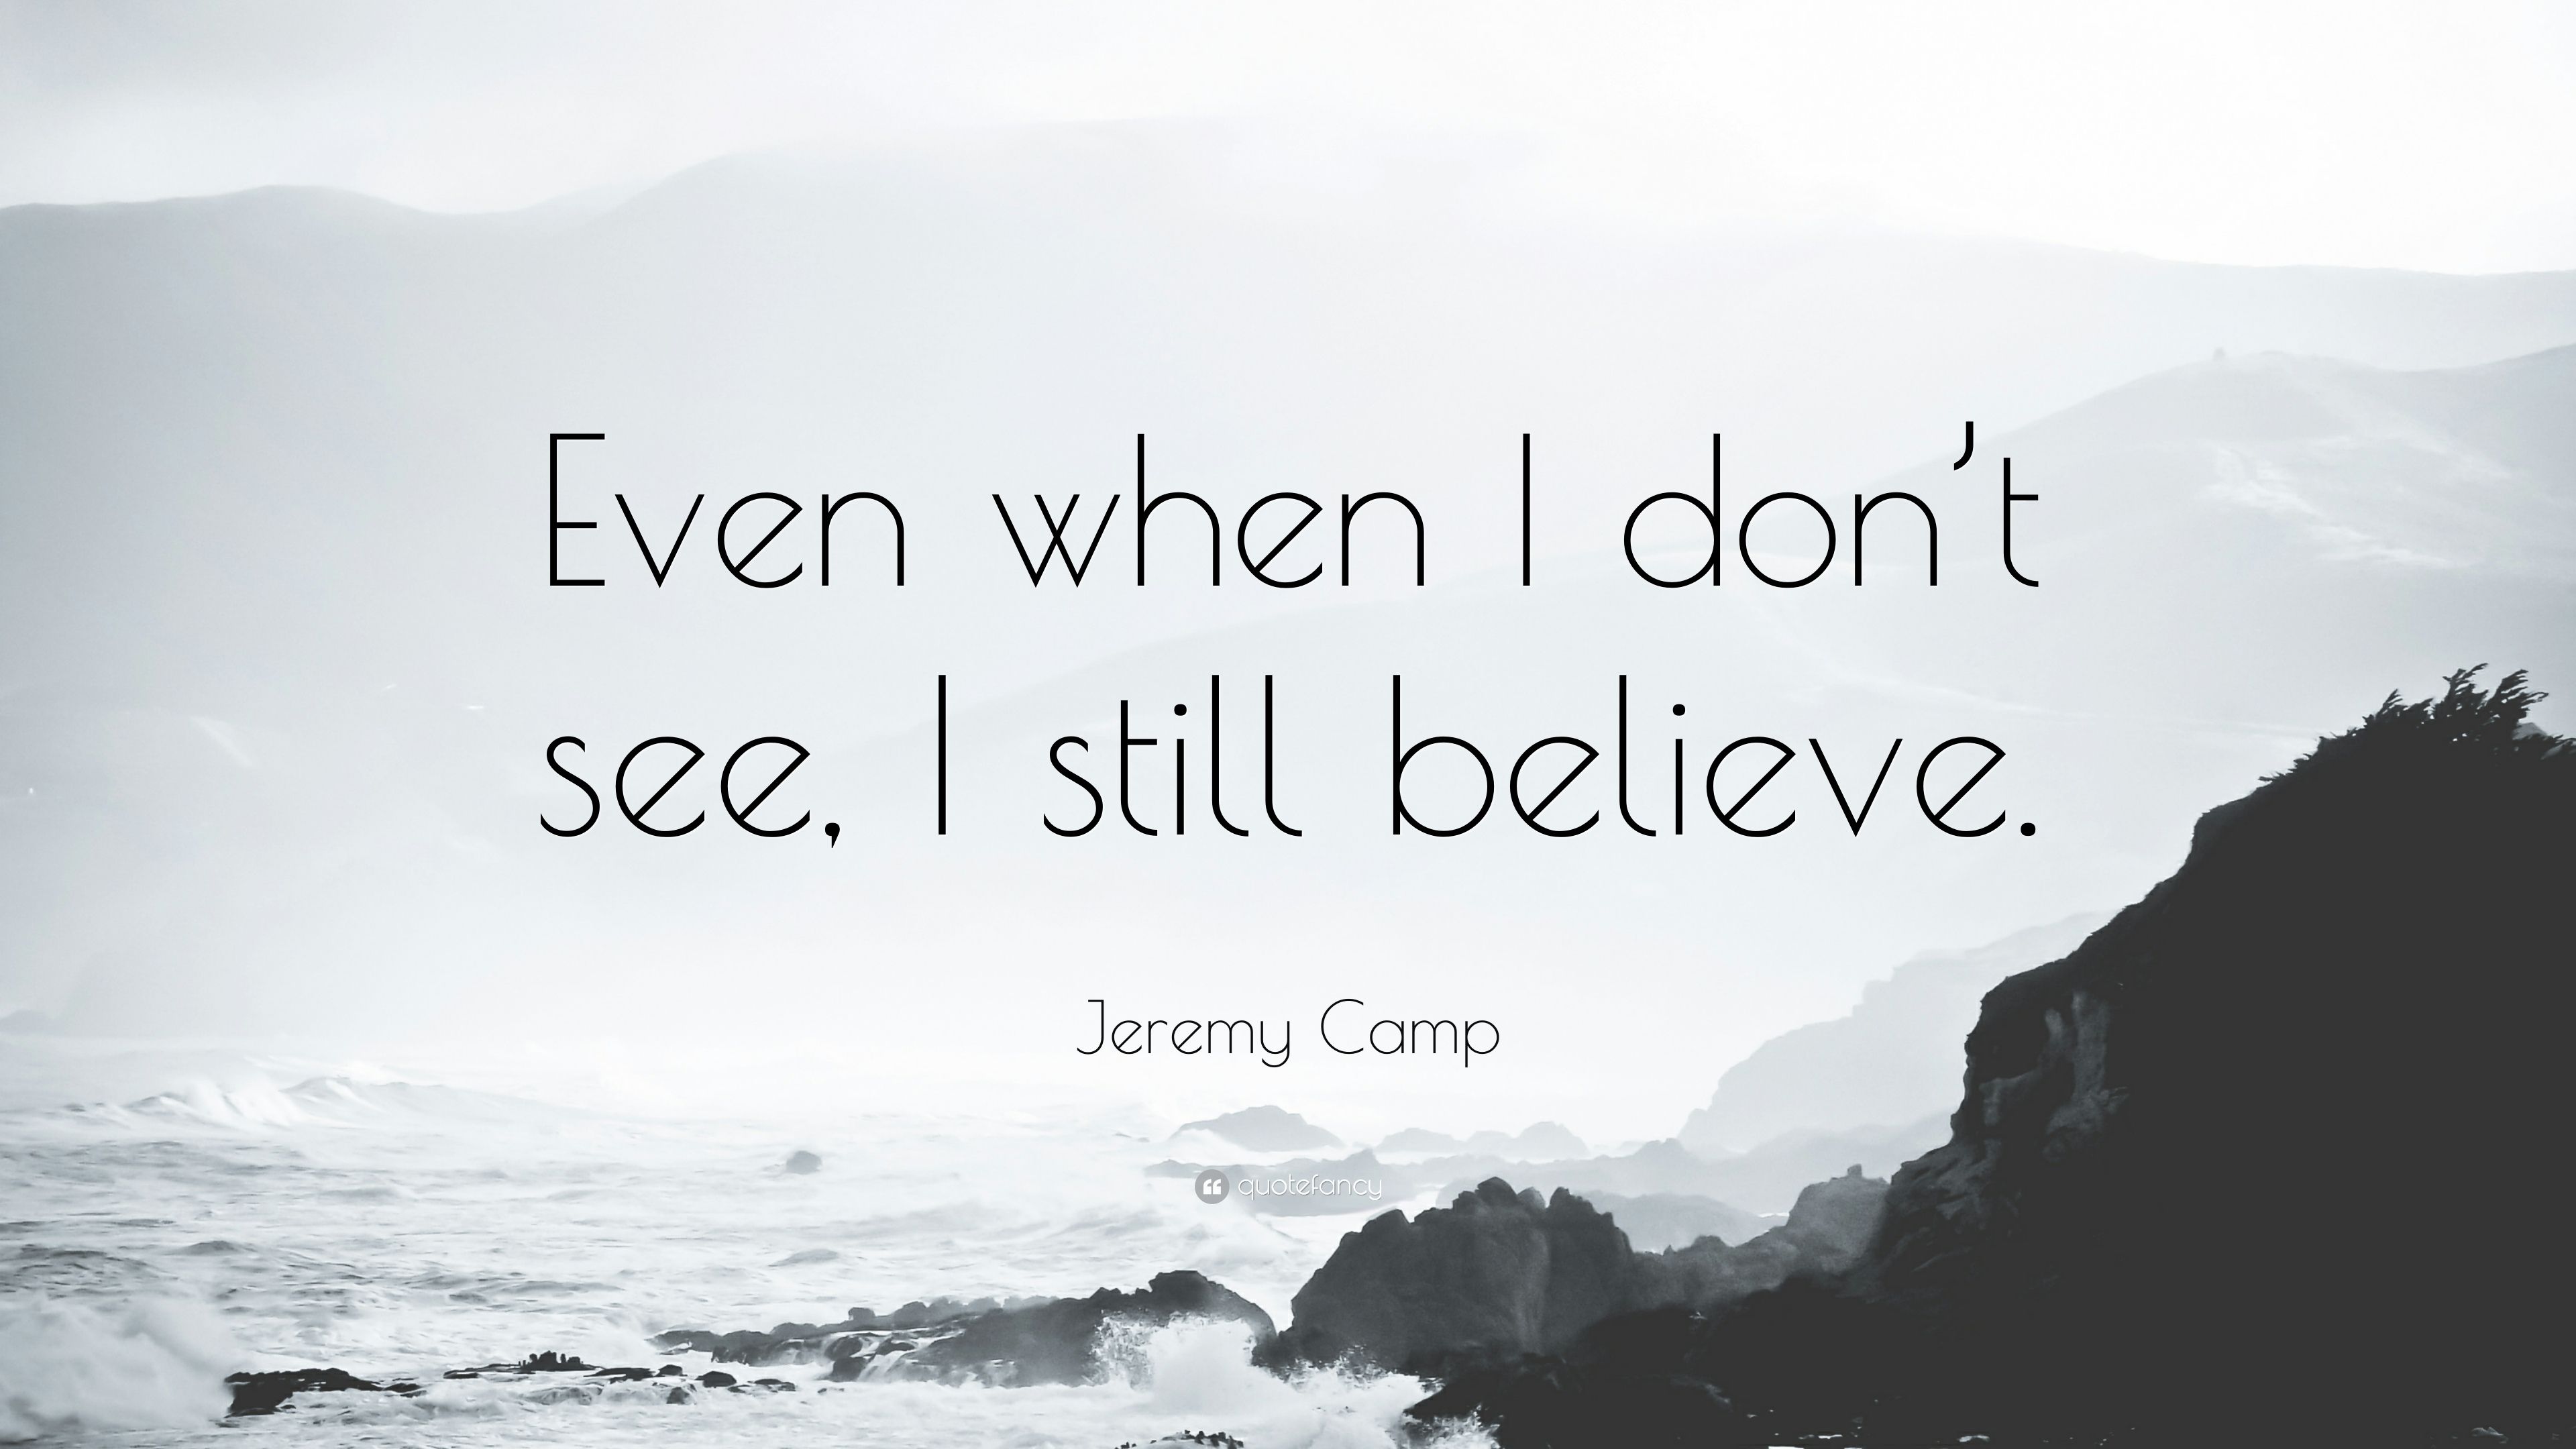 Jeremy Camp Quote: “Even when I don't see, I still believe.” 10